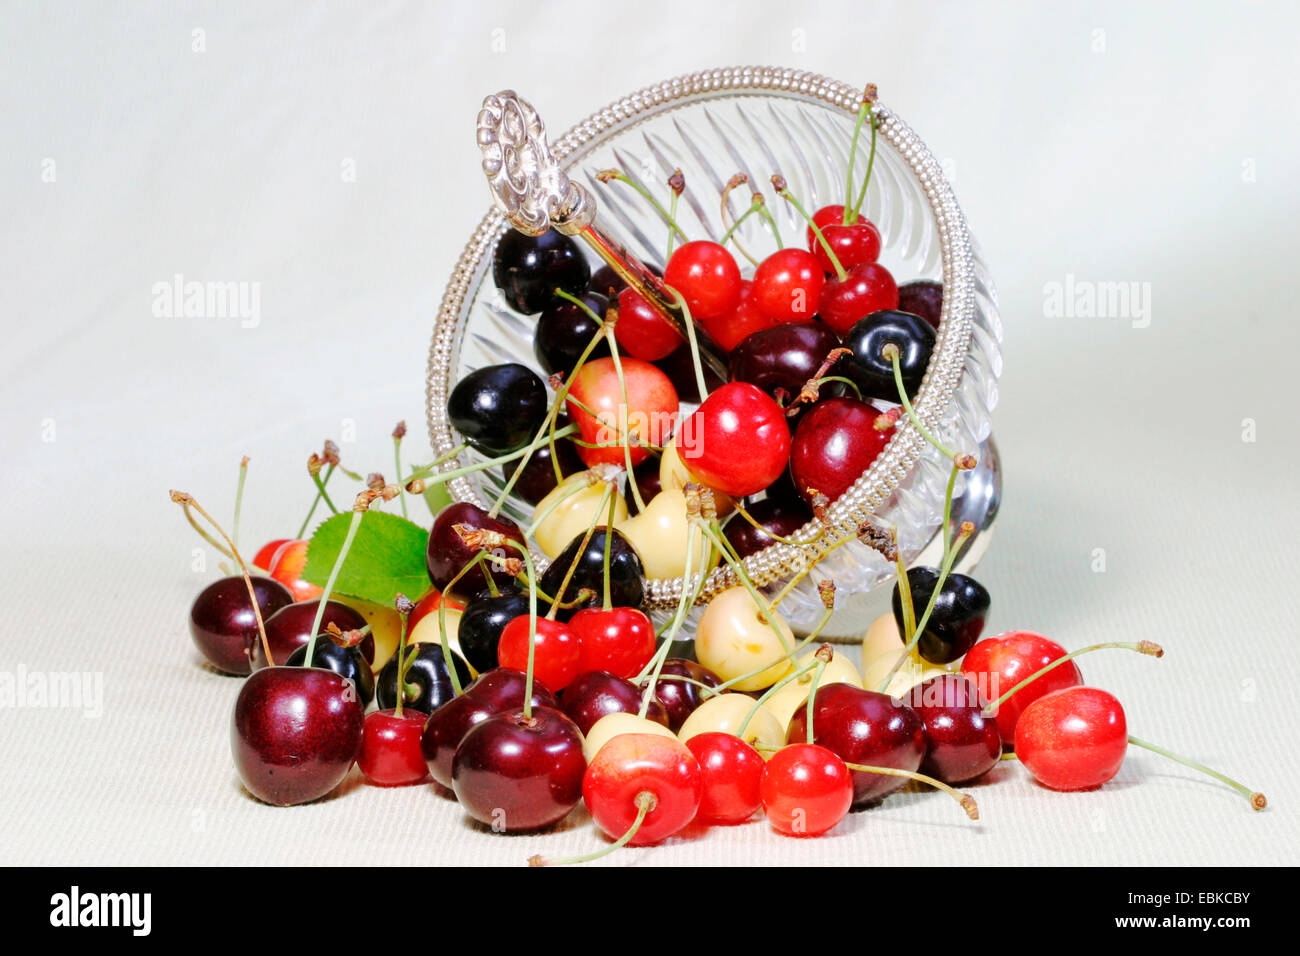 Diffrent cherry types, colorful cherry mix Stock Photo